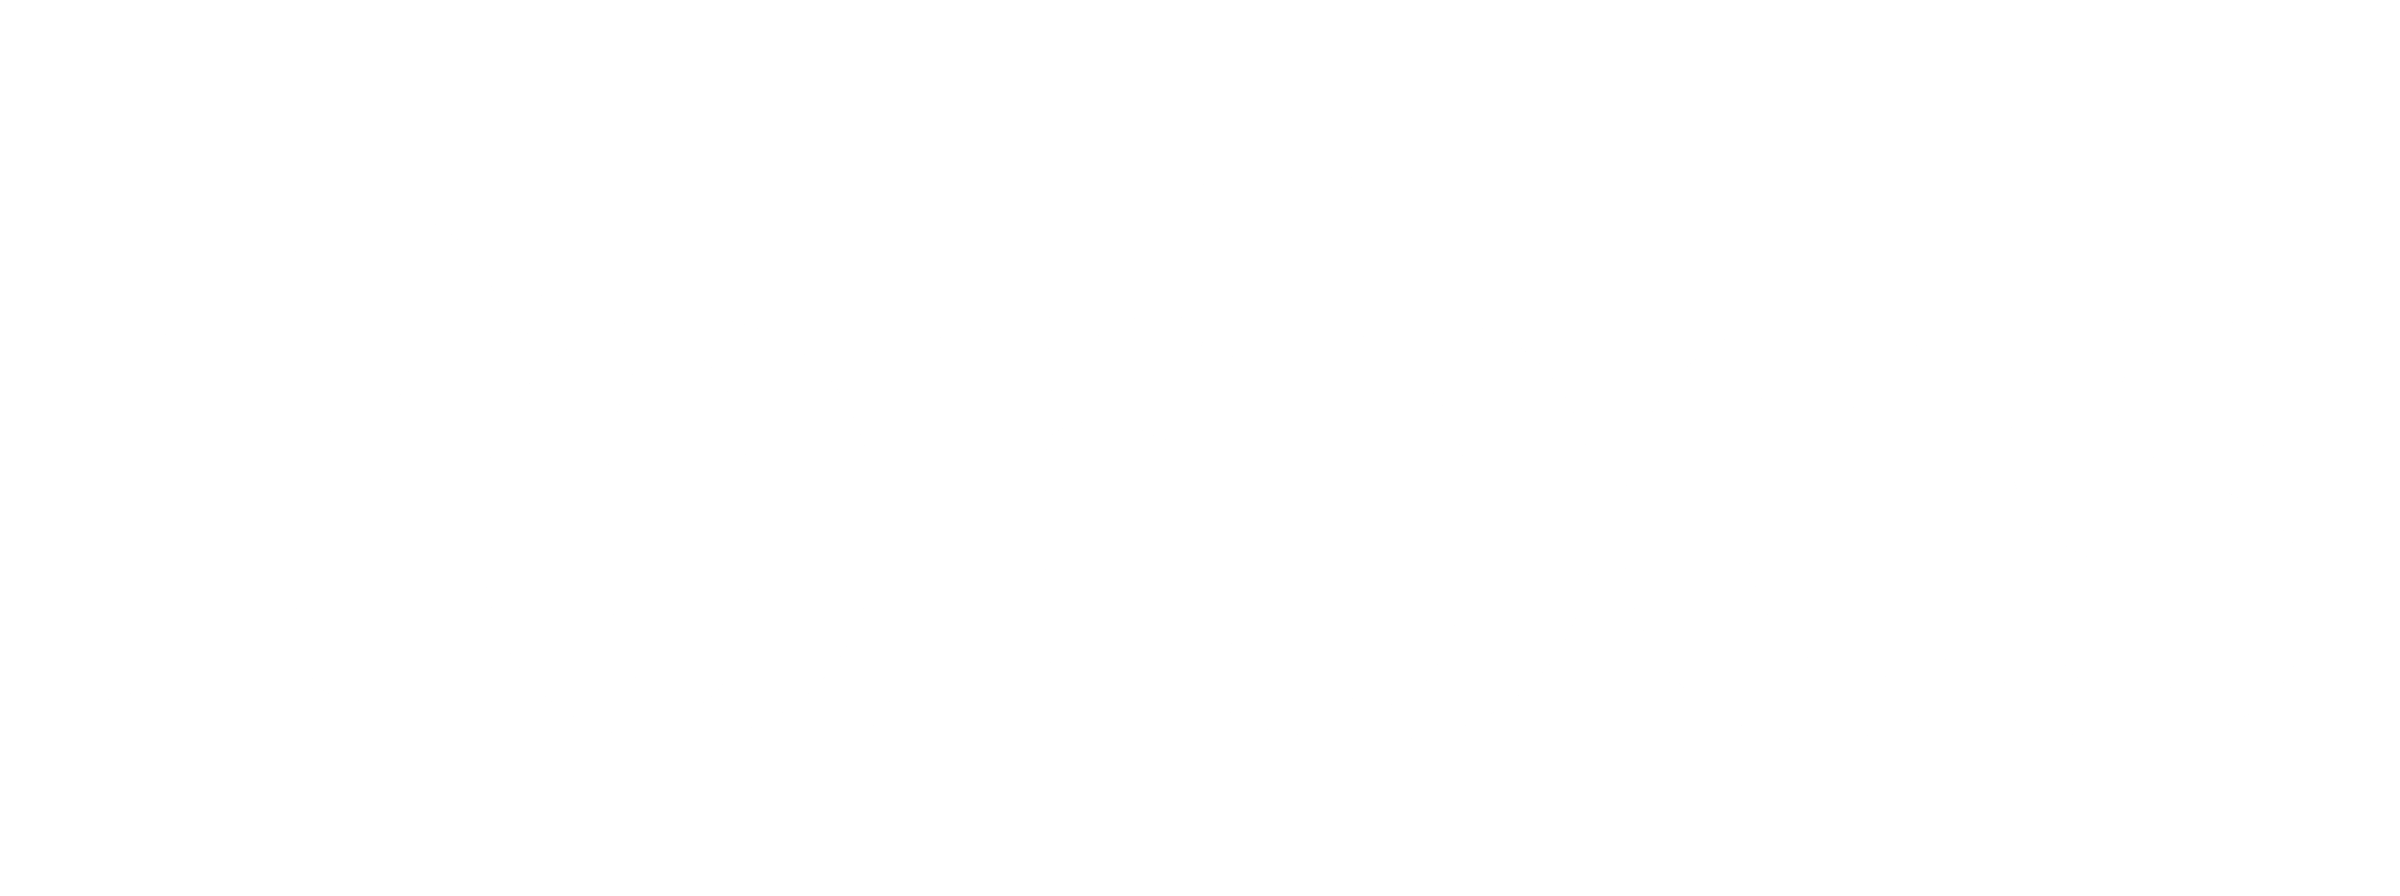 forbes-logo-black-and-white.png